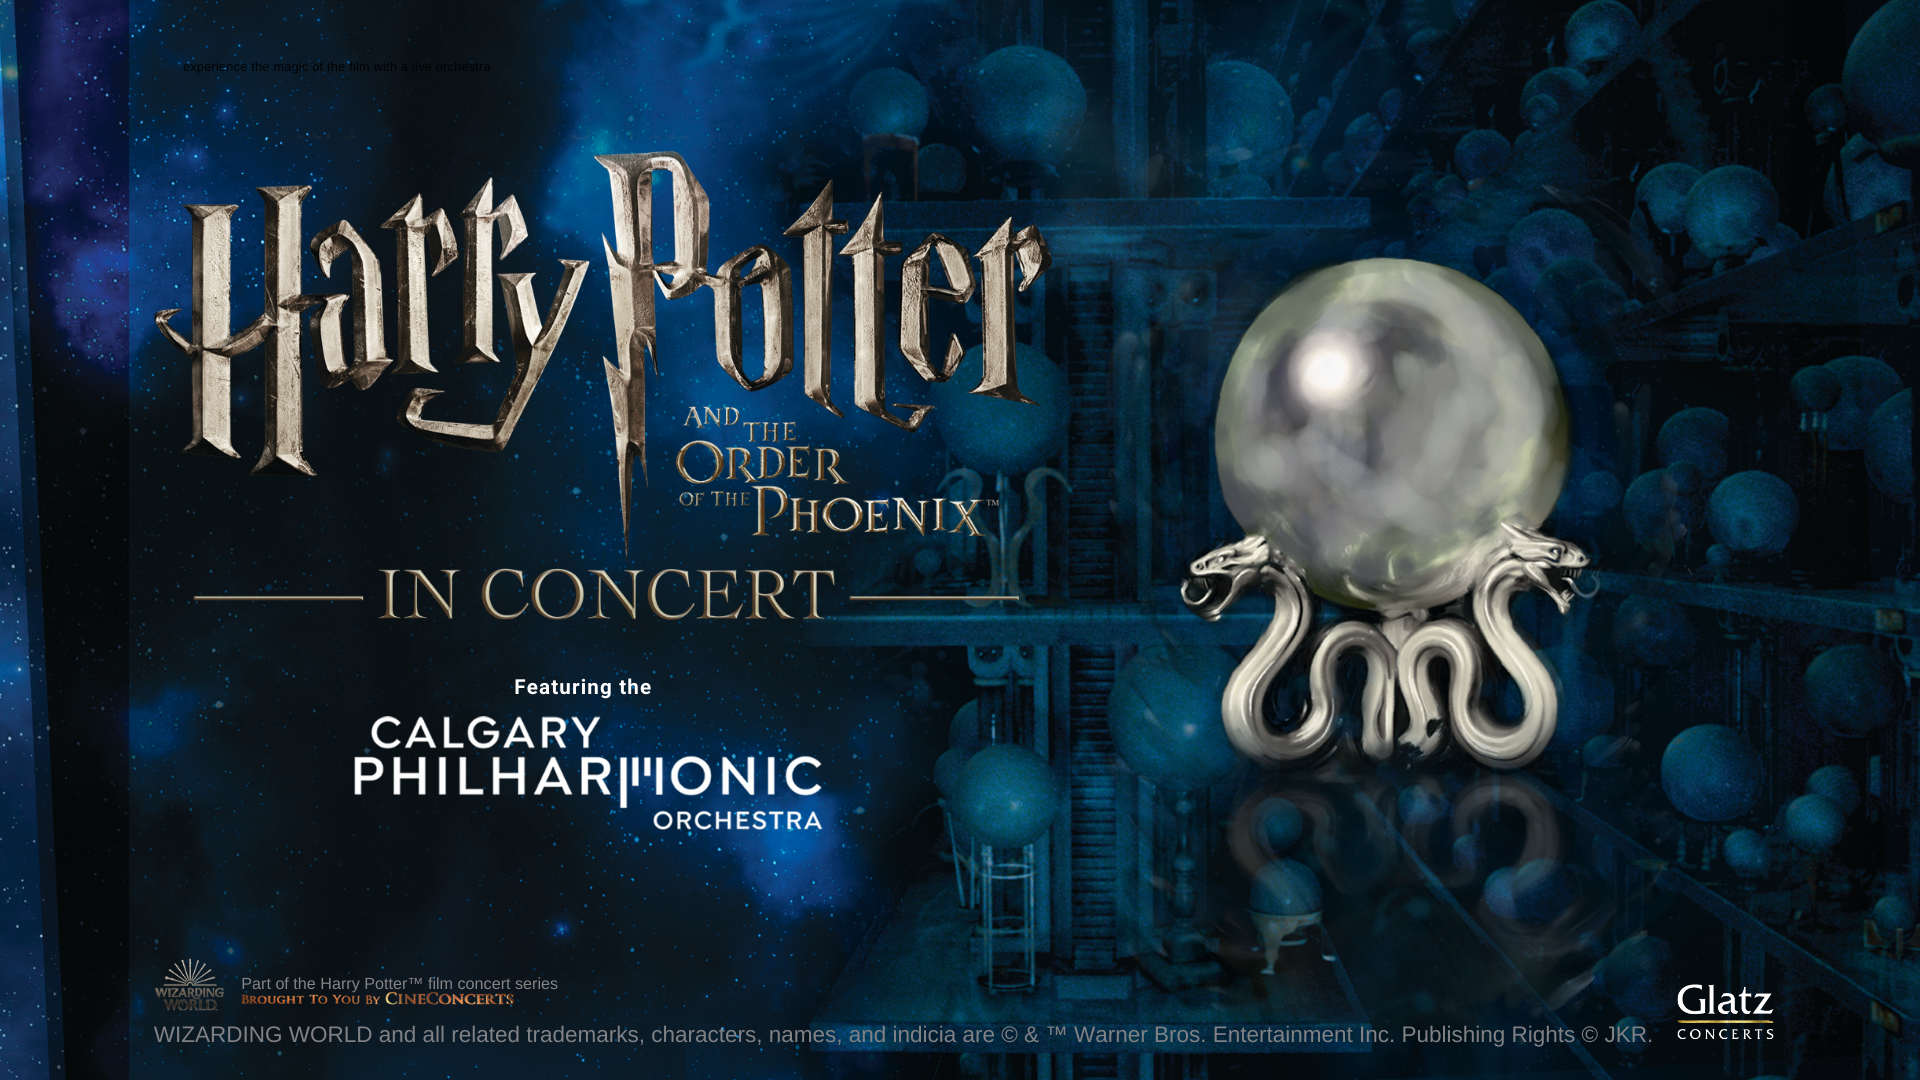 Harry Potter and the Order of the Phoenix™ in Concert